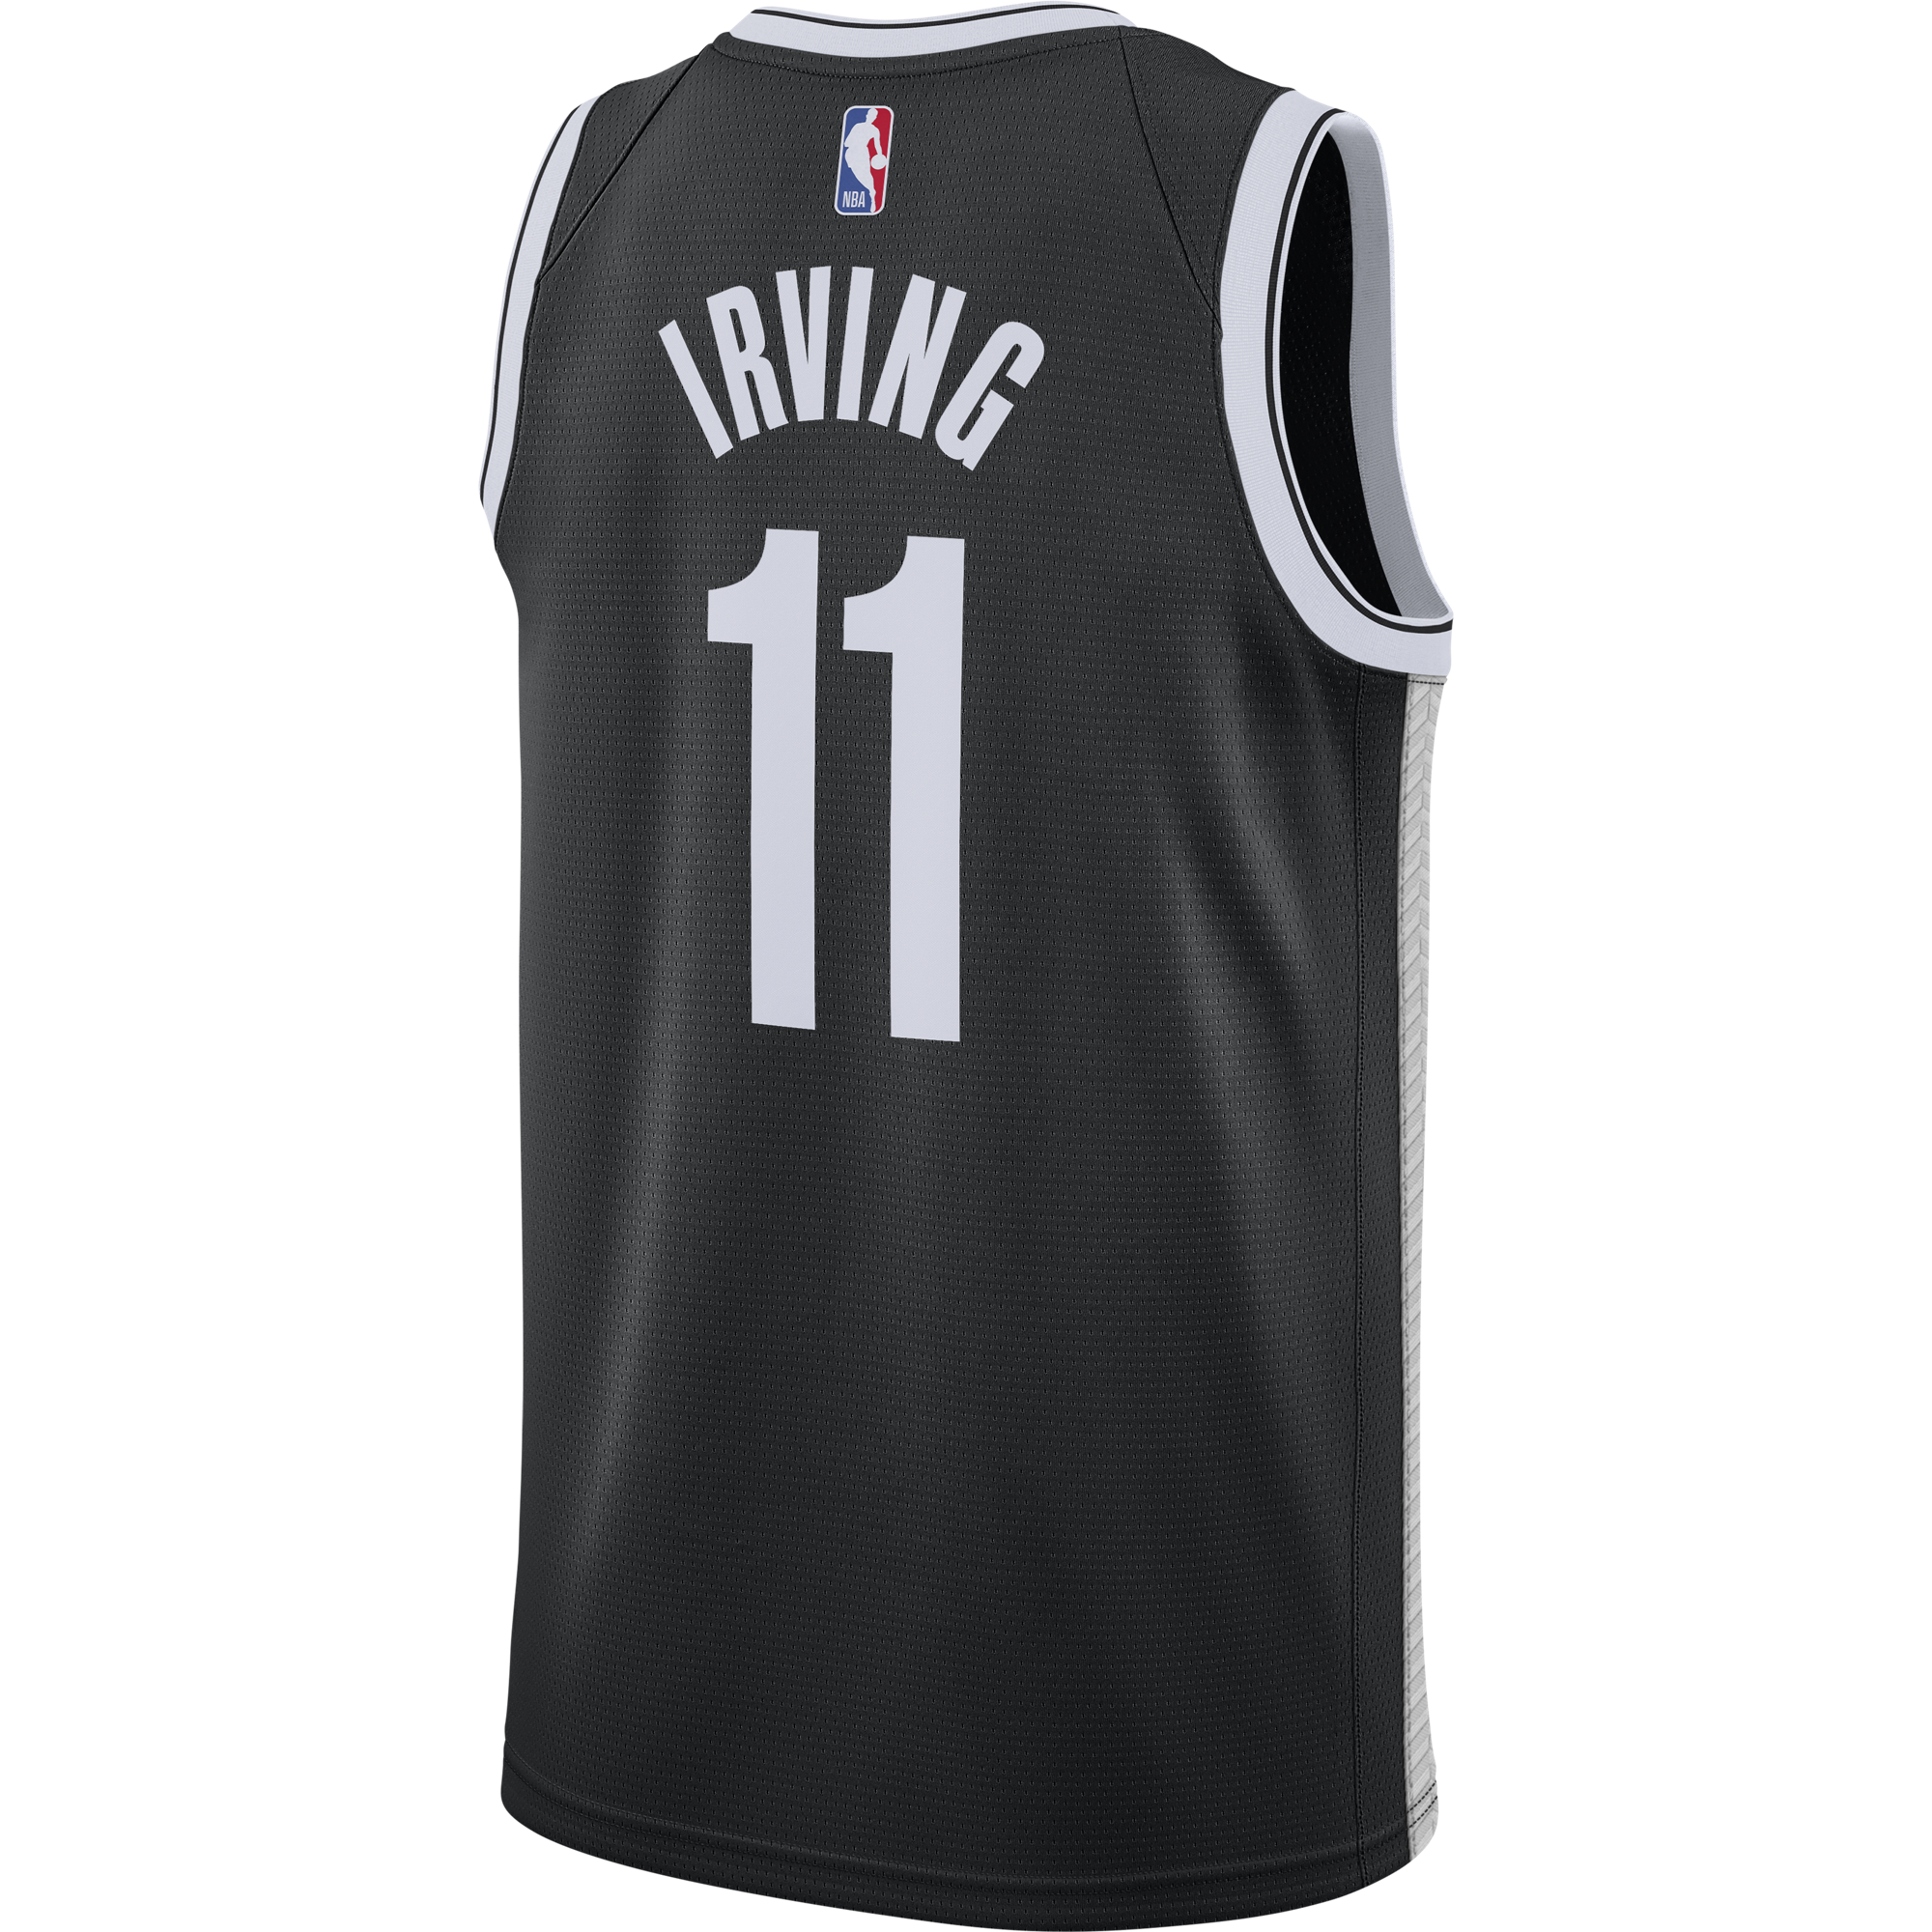 KYRIE IRVING Brooklyn Nets Bed-Stuy NIKE Basketball Jersey =SIZE 56 NEW NWT=